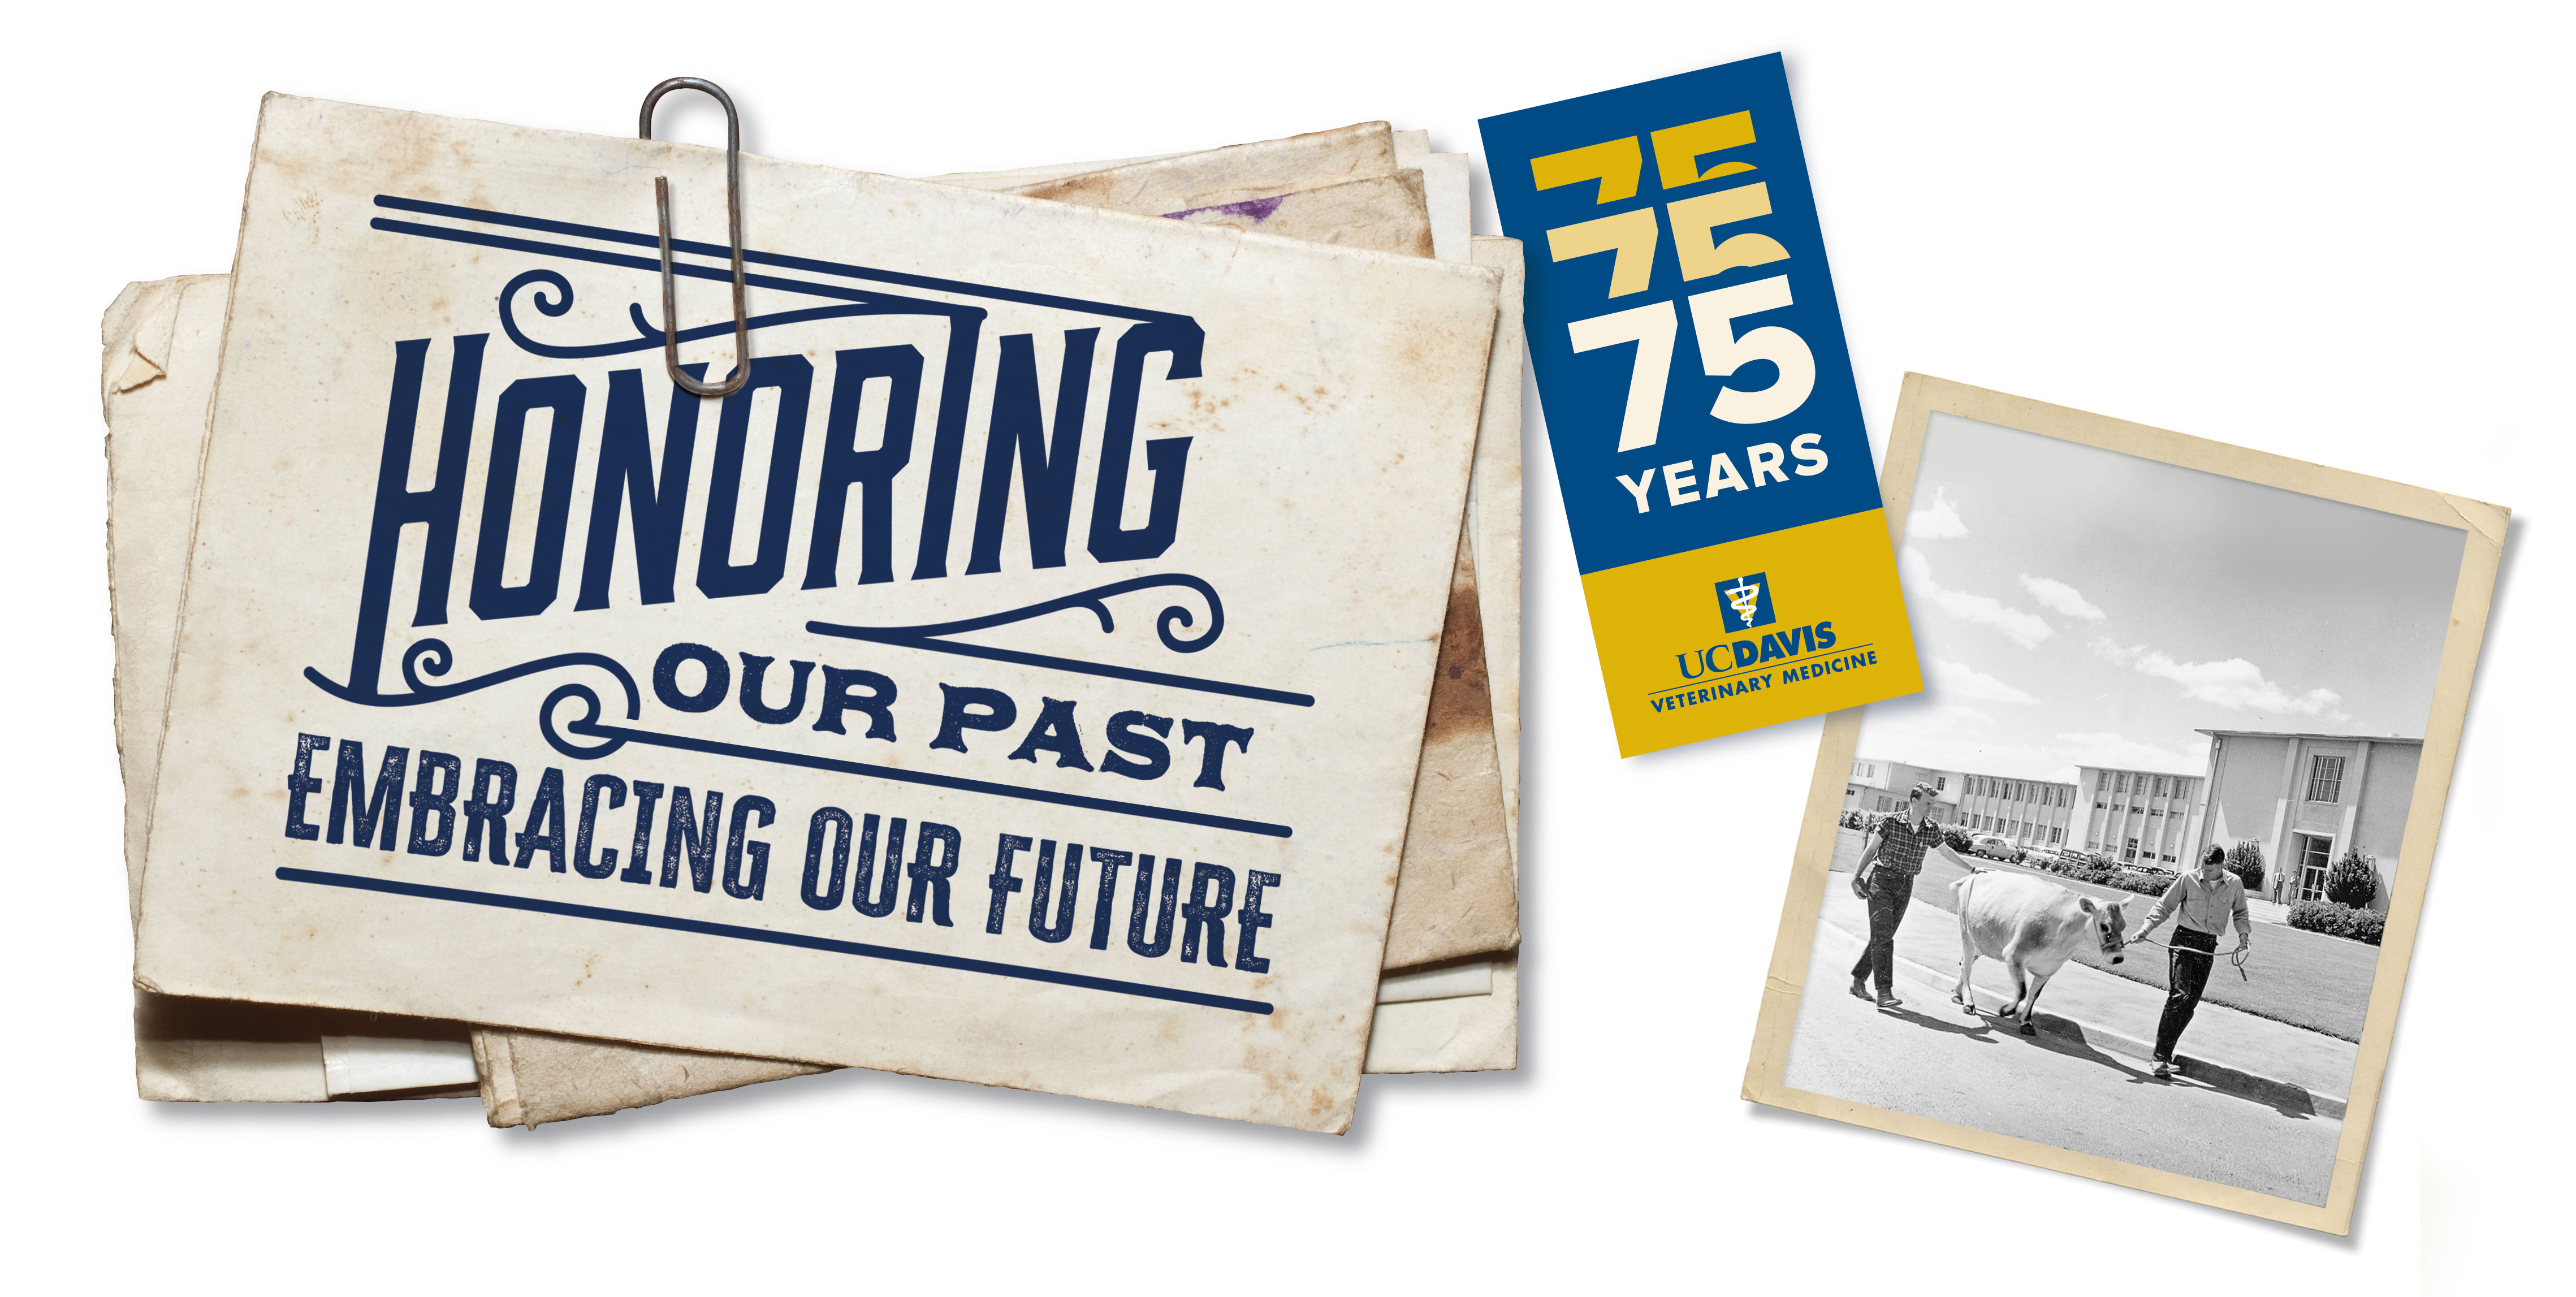 75 years of exceptional care and innovation.